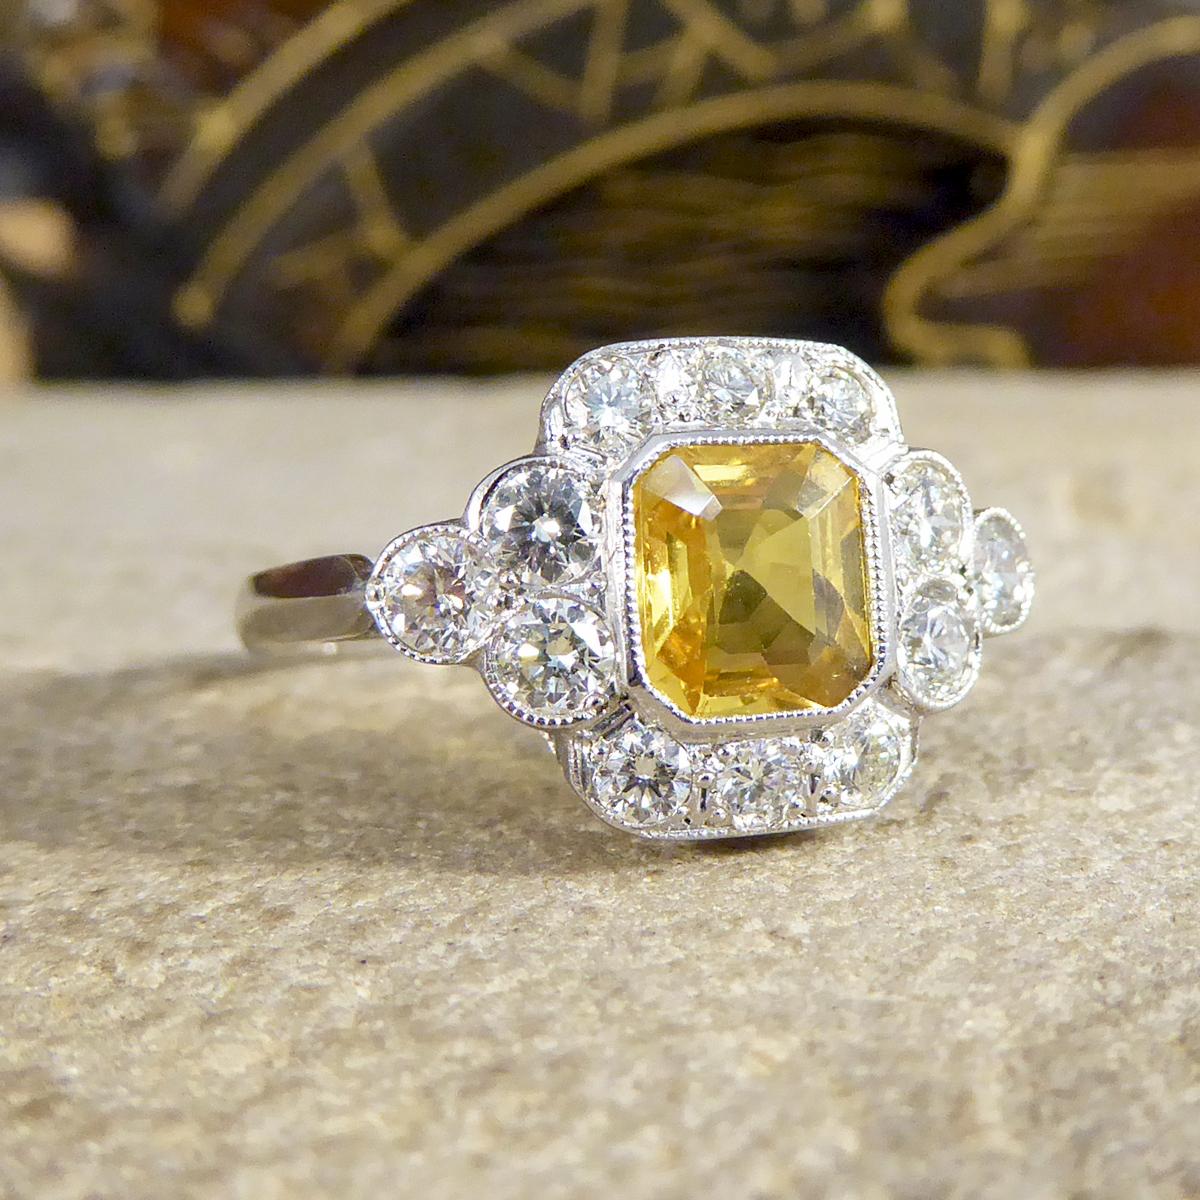 This fabulous Contemporary cluster ring dazzles on the hand and has been crafted to resemble an Edwardian bordering Art Deco style. It features a single central Asscher Cut Yellow Sapphire stone weighing 1.15ct, surrounded by 12 Brilliant cut